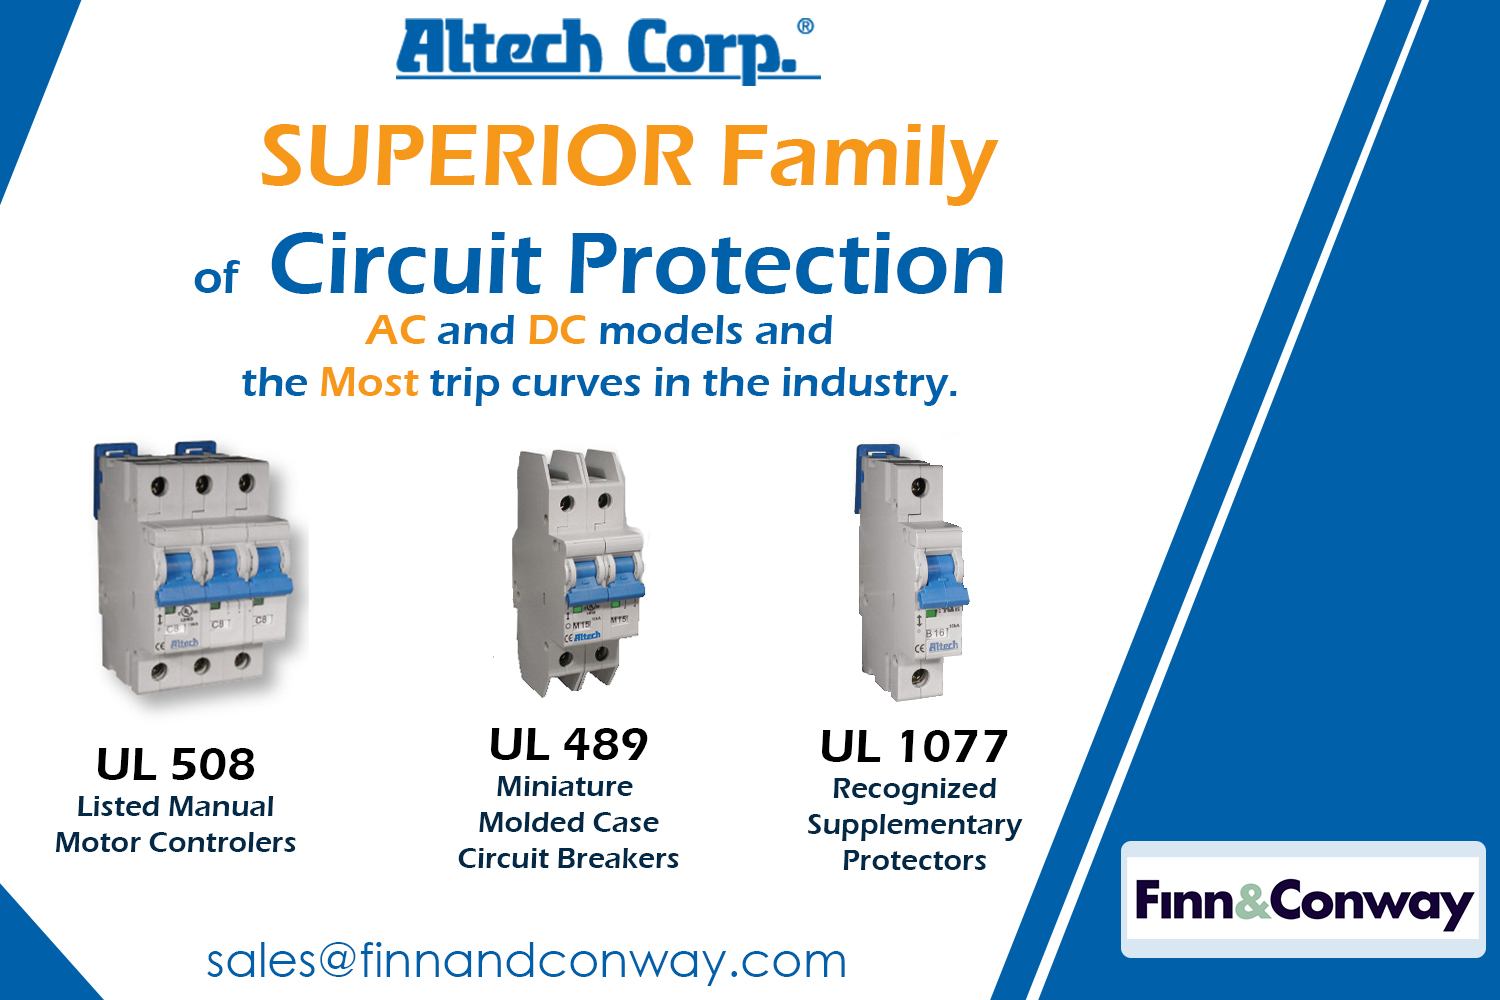 Altech's Superior Family of Circuit Protection